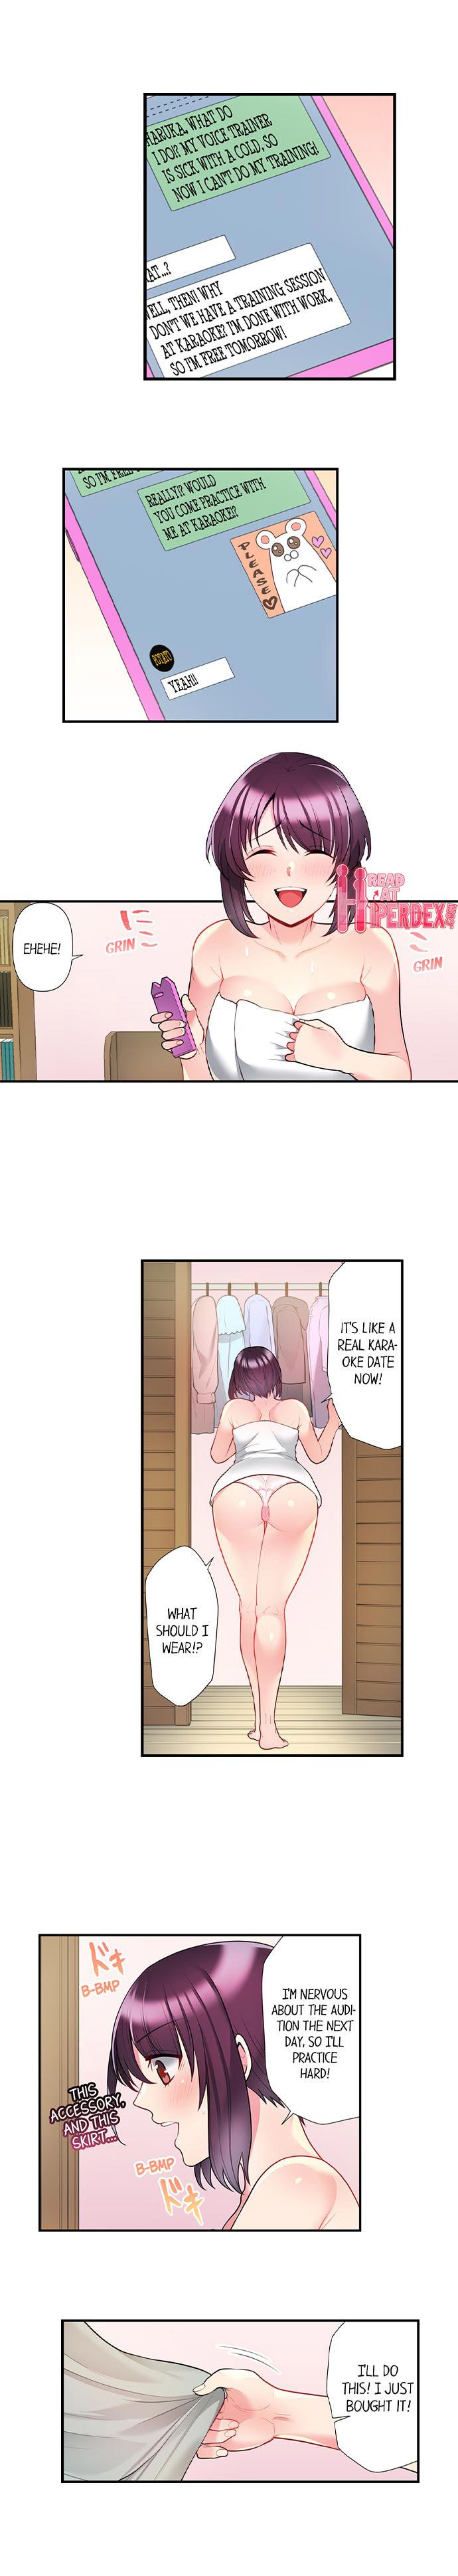 Bike Delivery Girl, Cumming To Your Door! - Chapter 13 Page 2